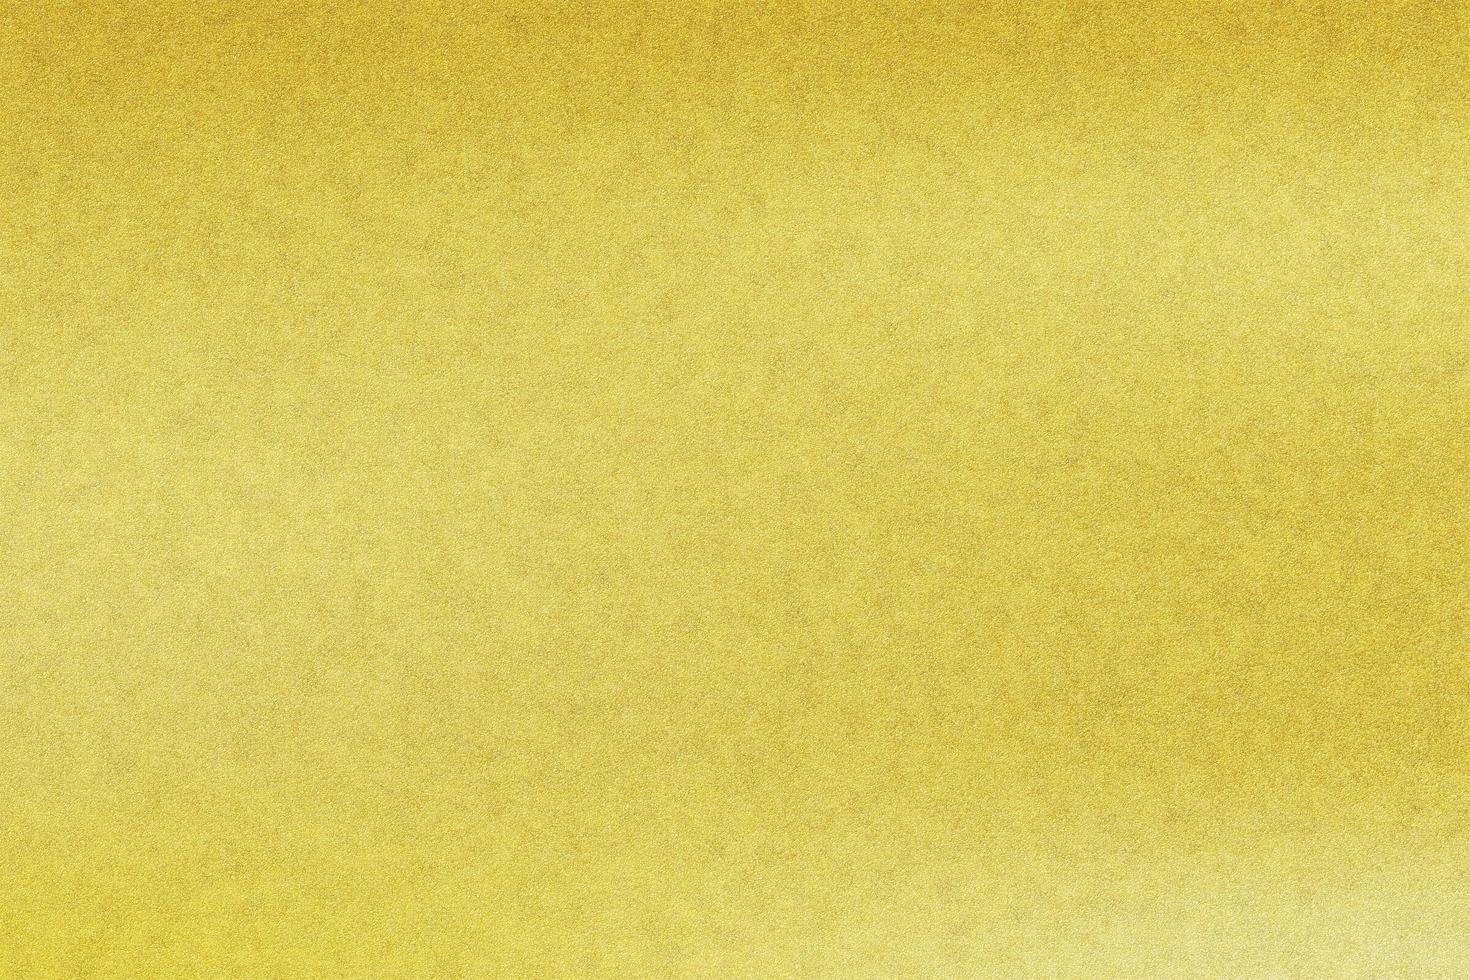 Texture of dirt stains on gold leather, abstract background photo